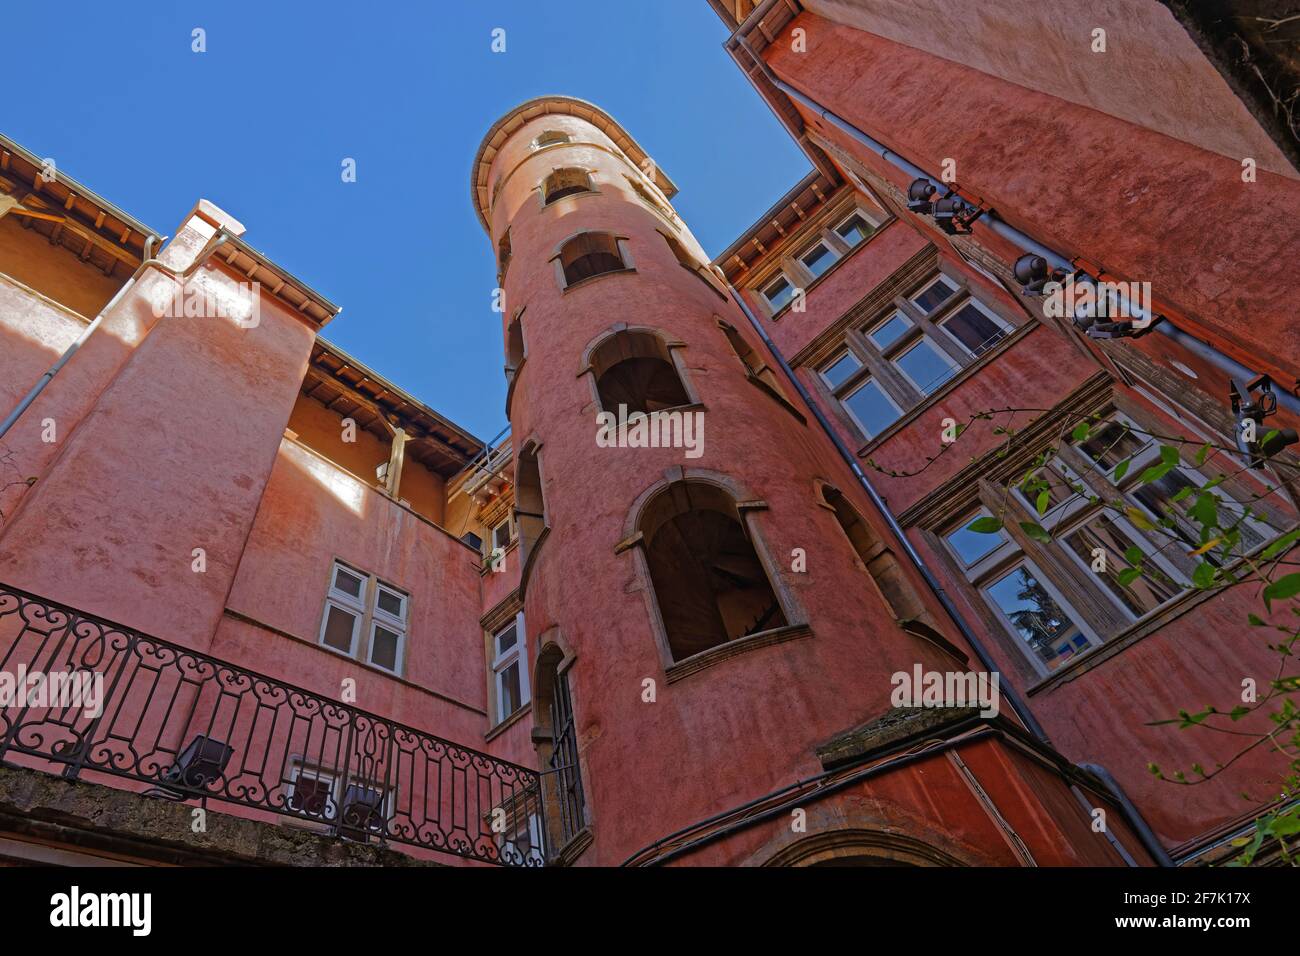 LYON, FRANCE, February 19, 2021 : La Maison du Crible, also known as Pink Tower because of its ochre-coloured staircase, has been listed as a historic Stock Photo